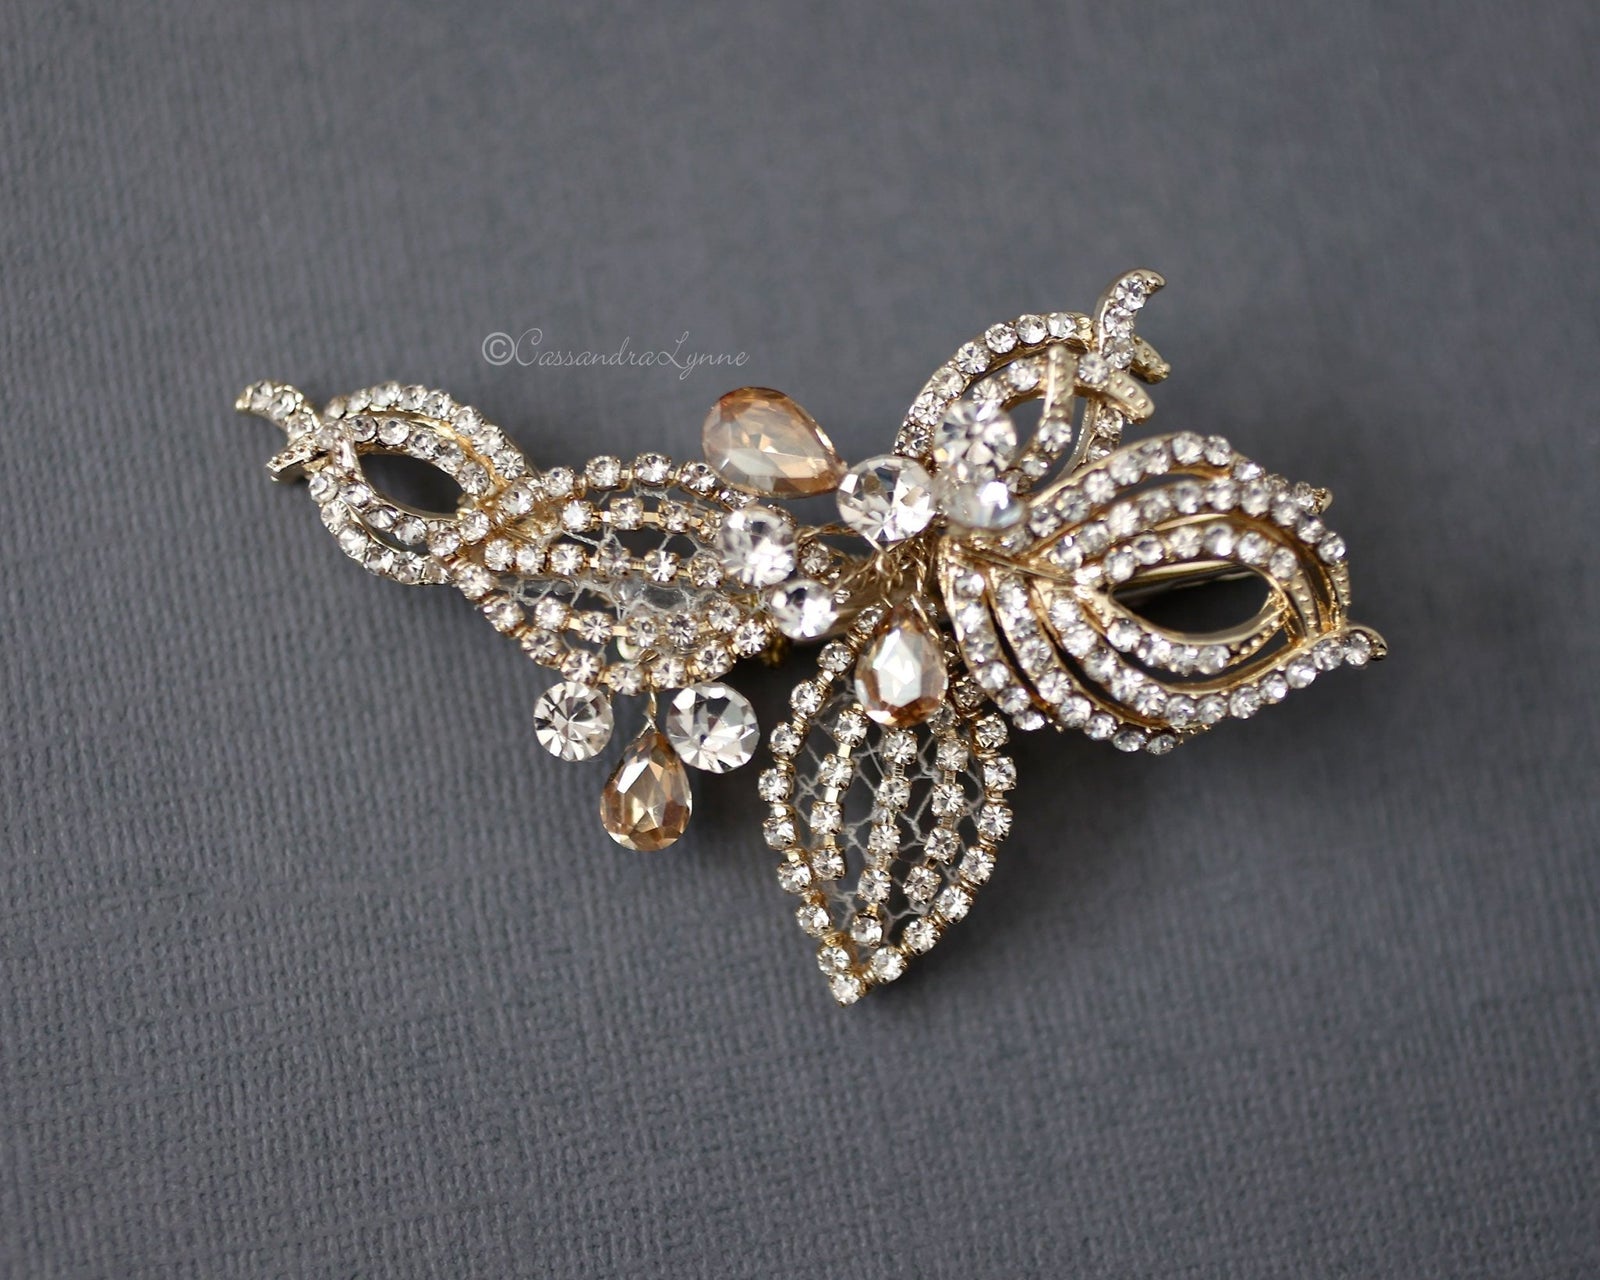 Petite Gold Wedding Hair Clip with Gold Crystals - Cassandra Lynne